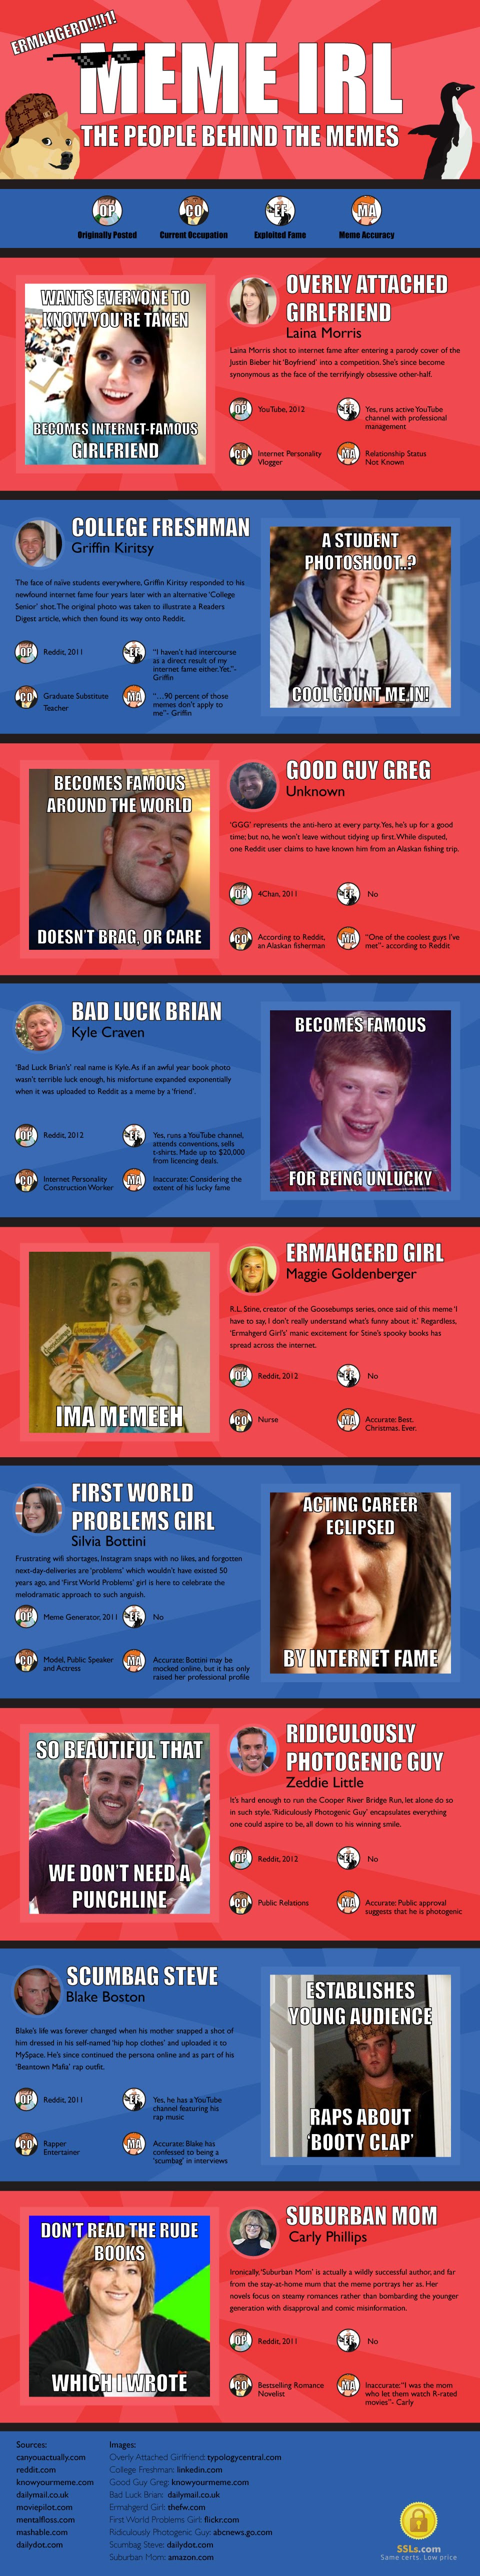 The People Behind the Memes – #Infographic